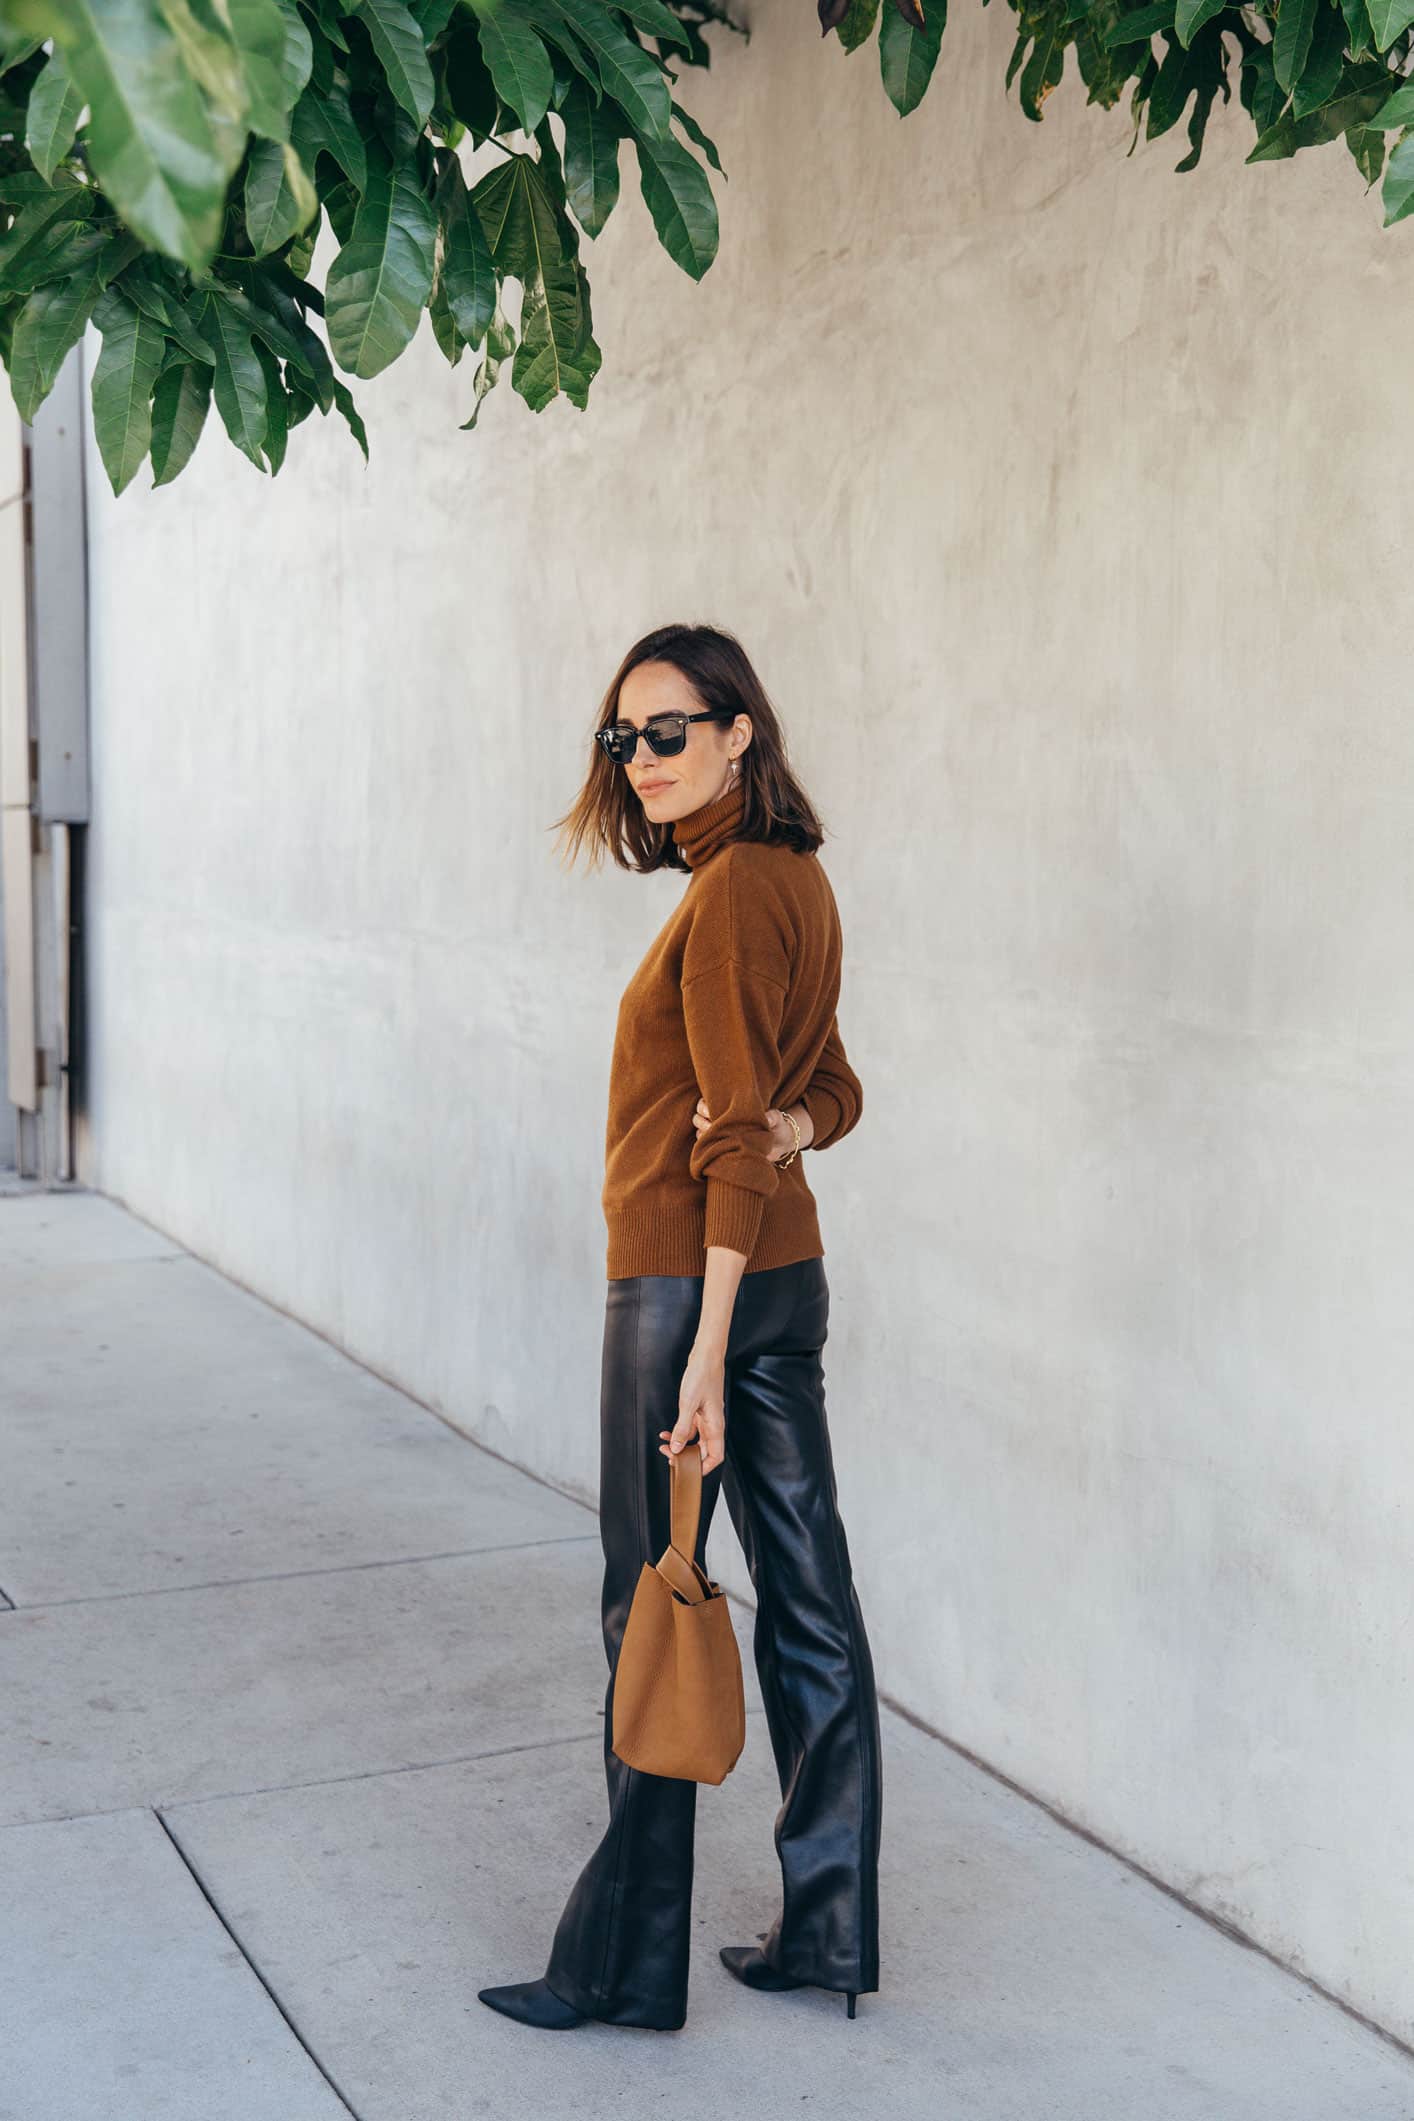 Louise Roe wearing theory leather trousers and camel sweater fall outfit